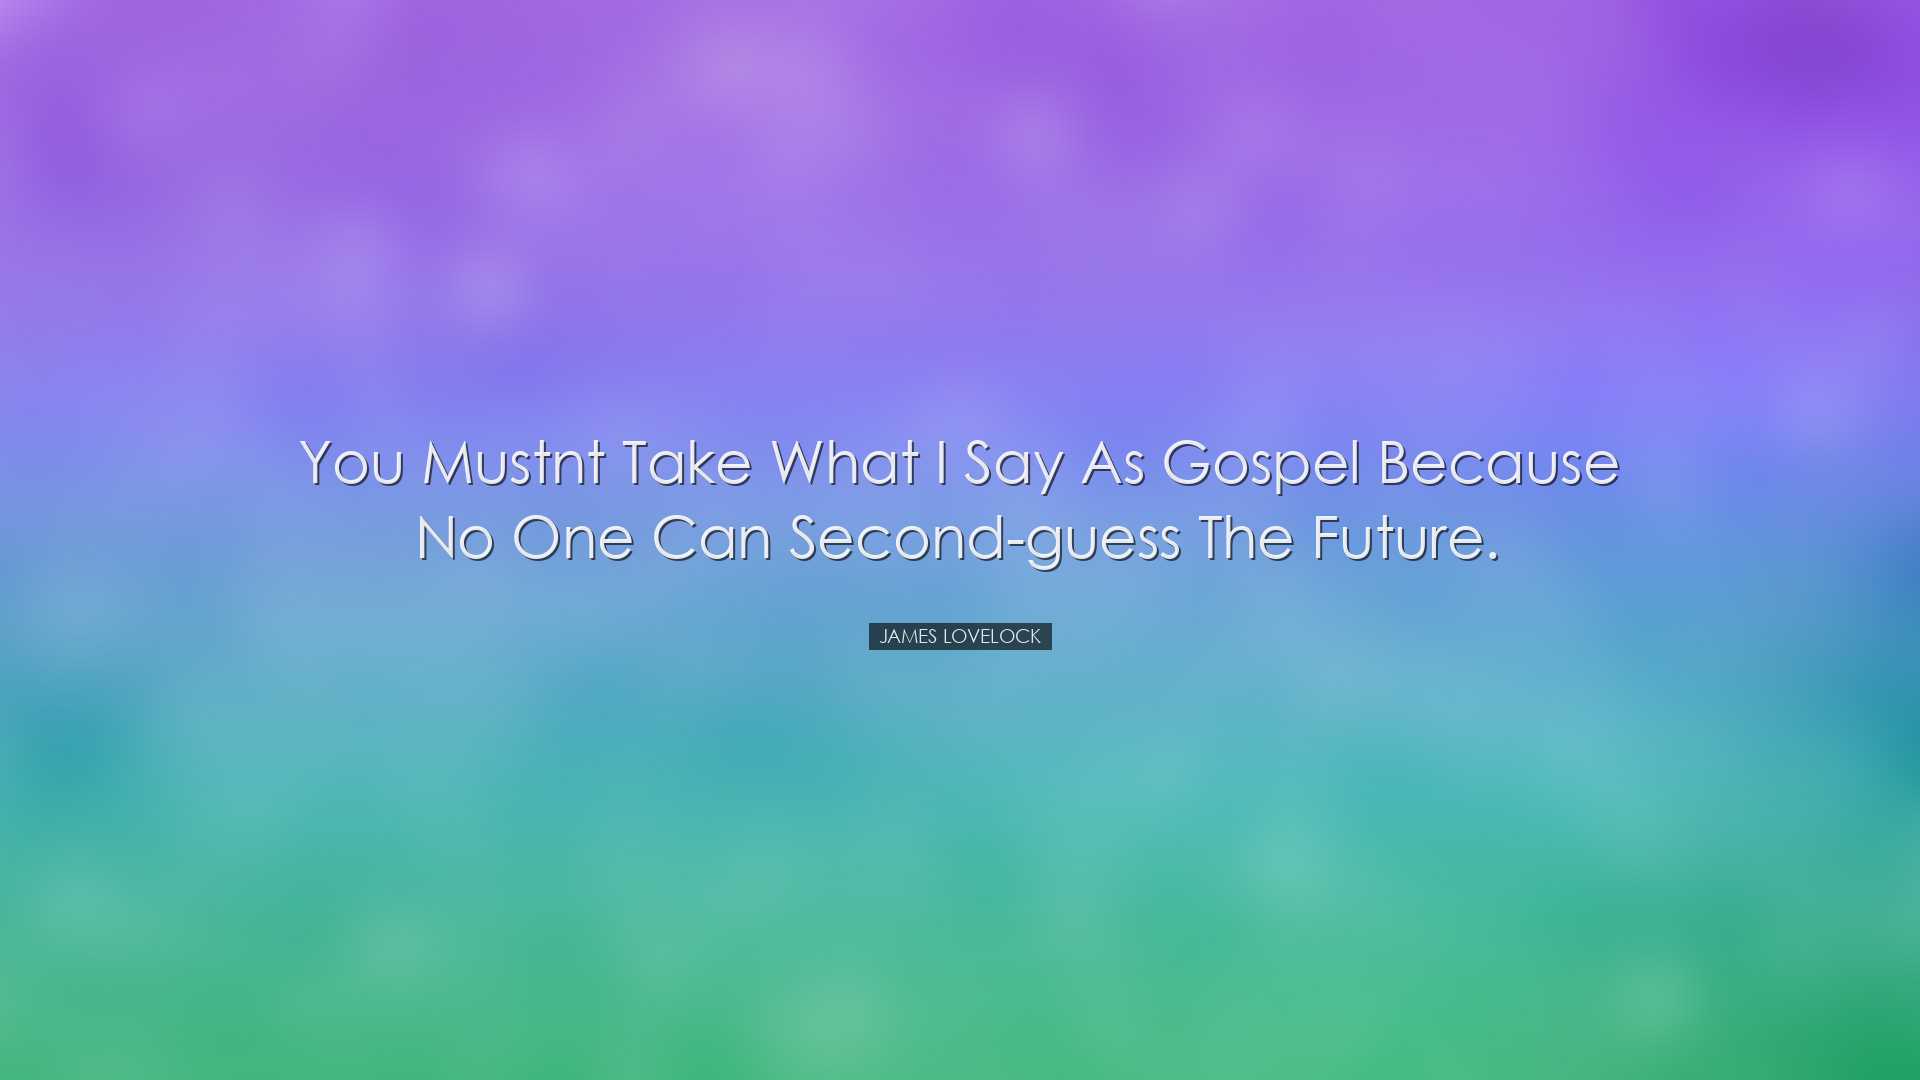 You mustnt take what I say as gospel because no one can second-gue